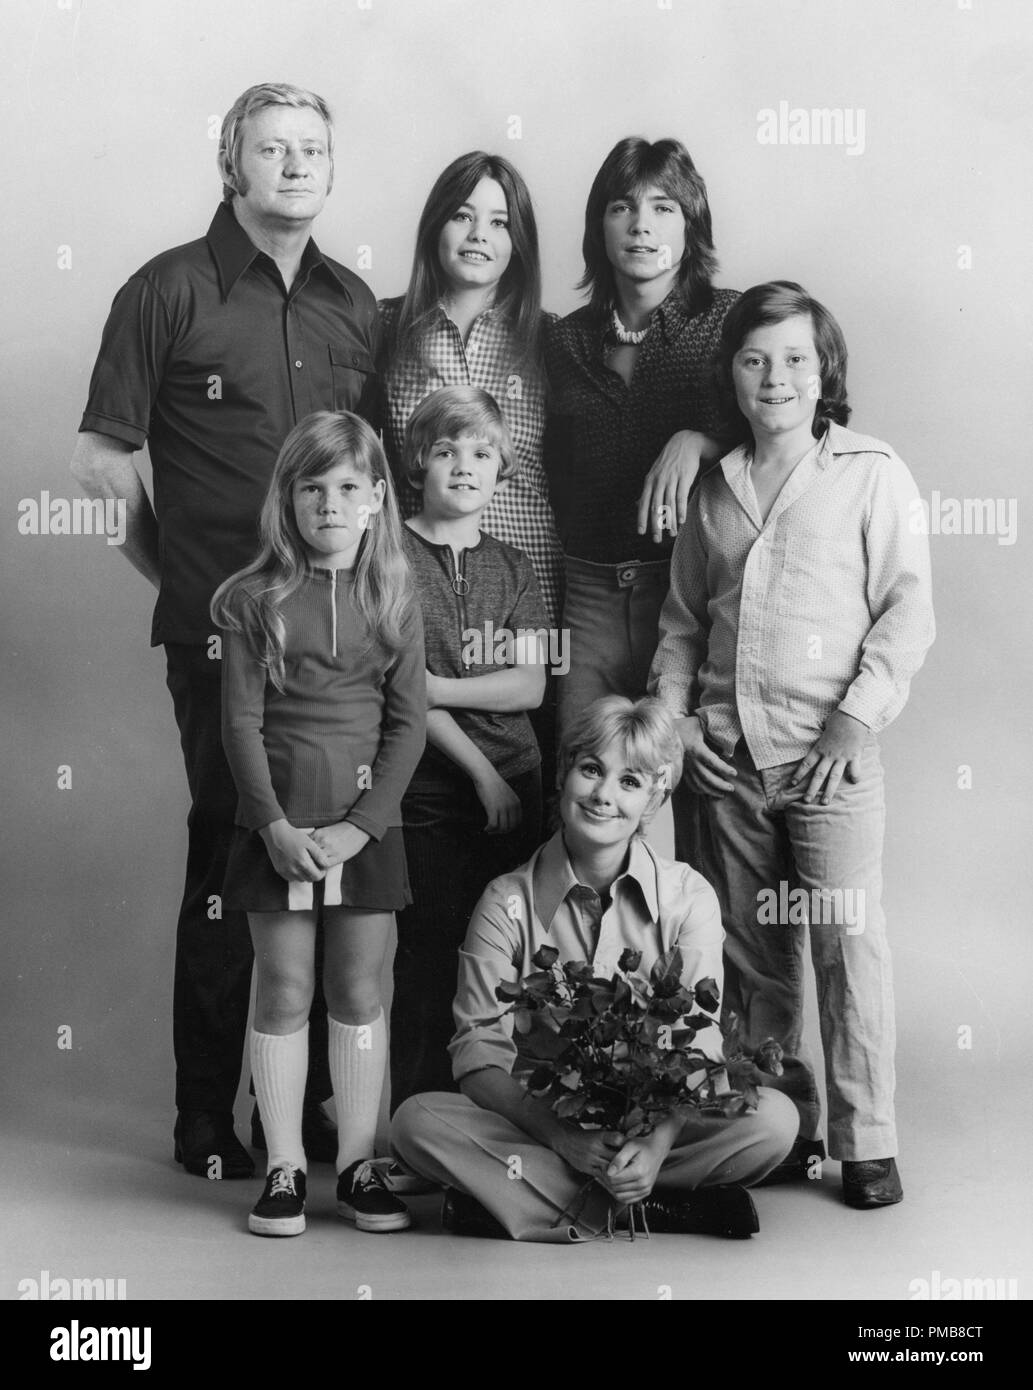 Dave Madden, Suzanne Crough, Brian Forster, Susan Dey, David Cassidy, Danny Bonaduce, Shirley Jones    'The Partridge Family' (1970 - 1974) ABC File Reference # 32337 075THA Stock Photo